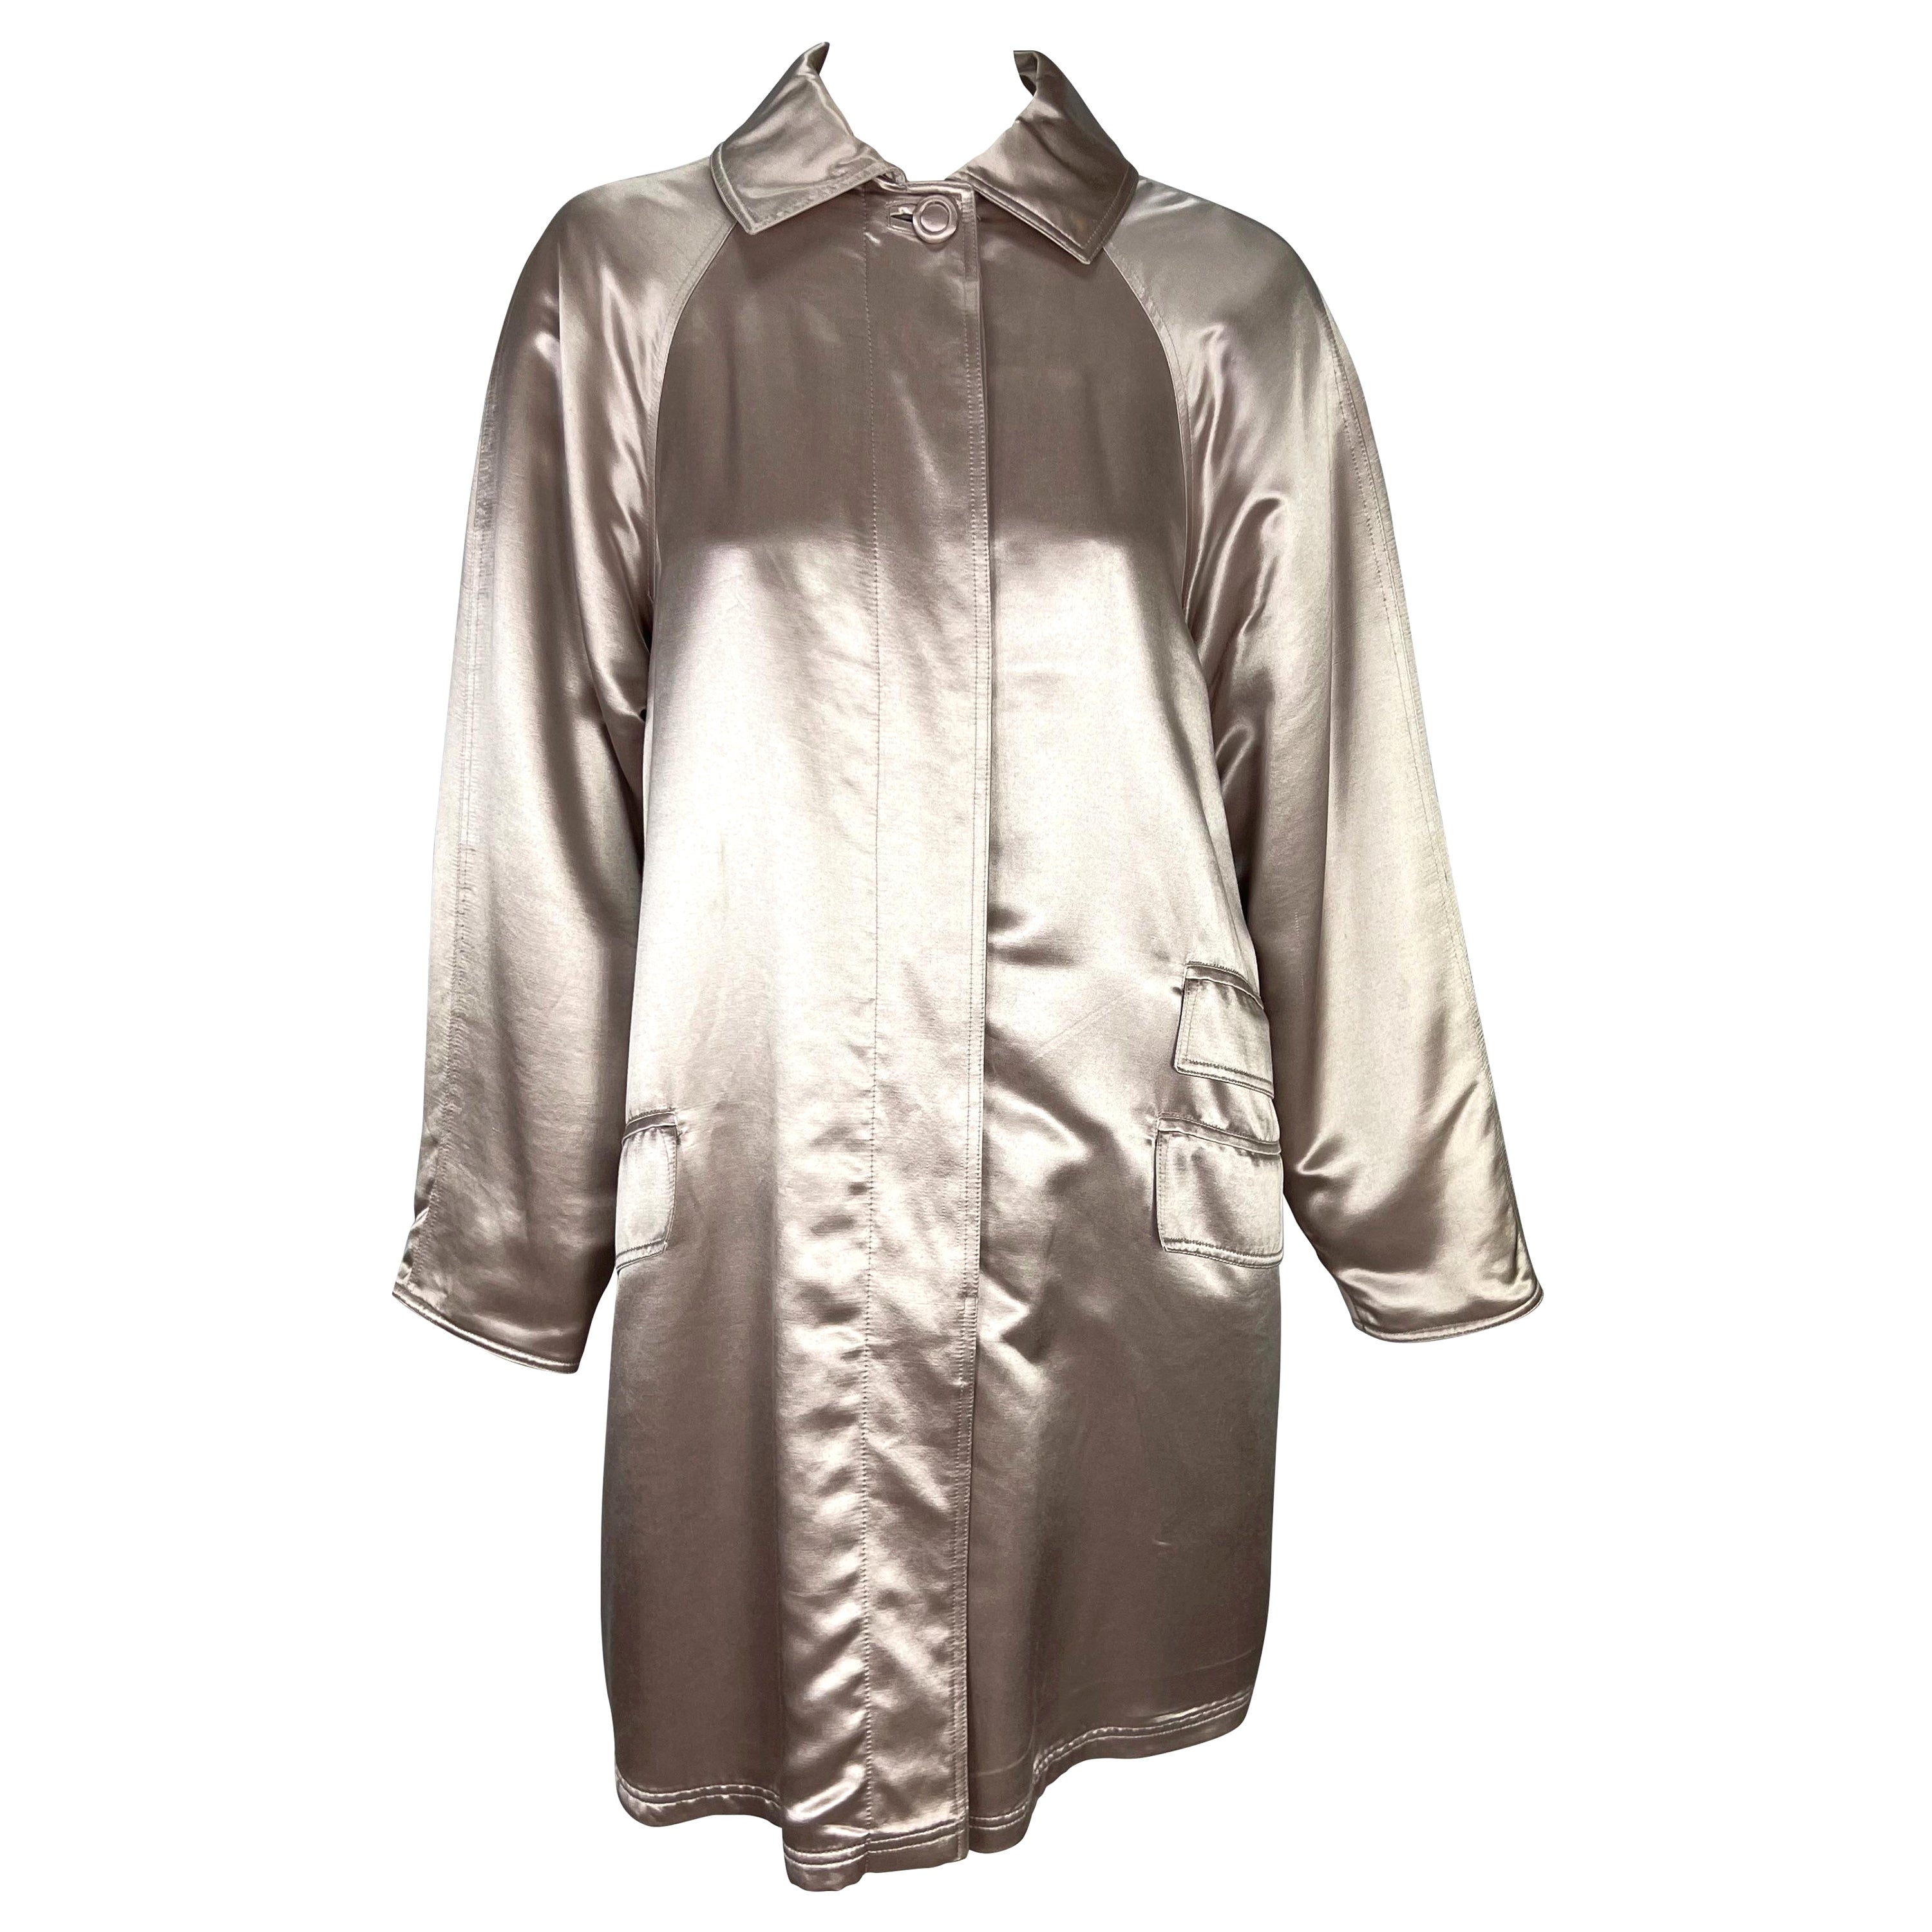 F/W 1995 Gianni Versace Couture Runway Silver Blush Satin Button Coat